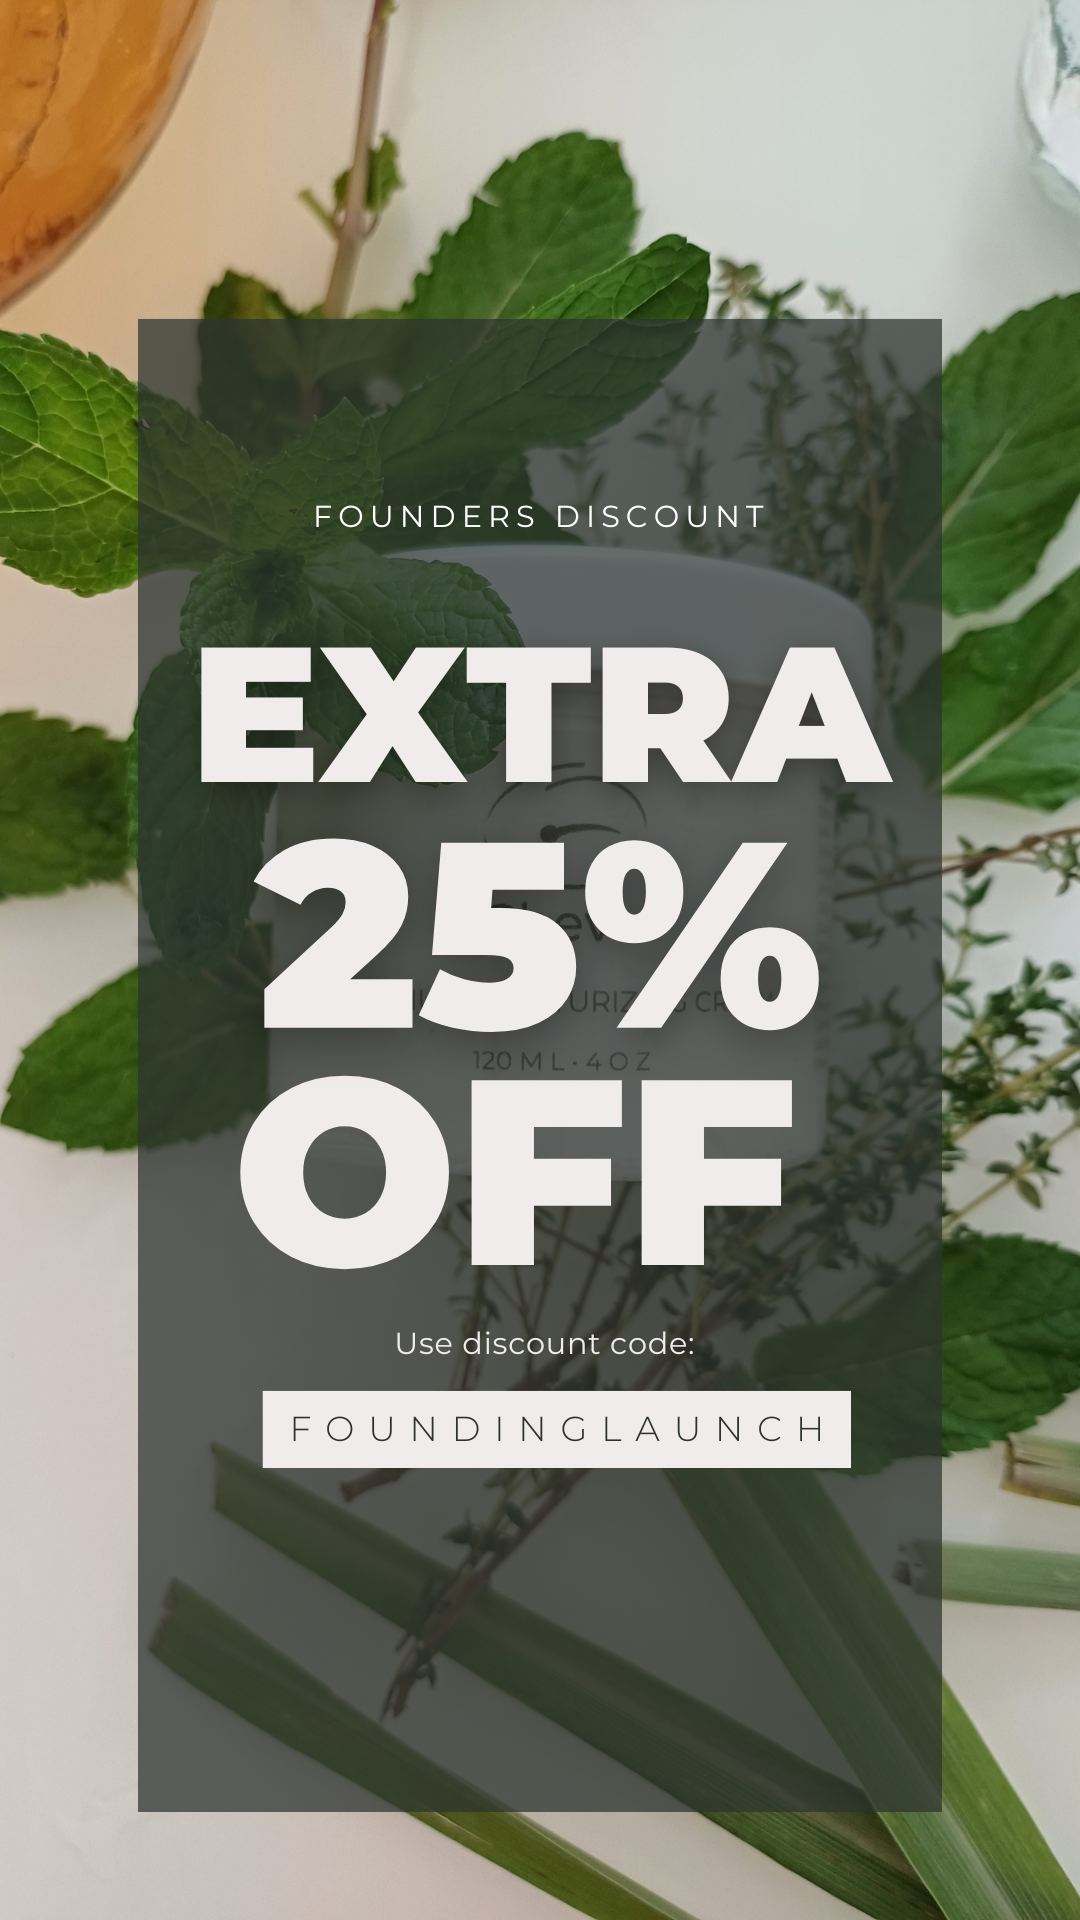 Founders discount